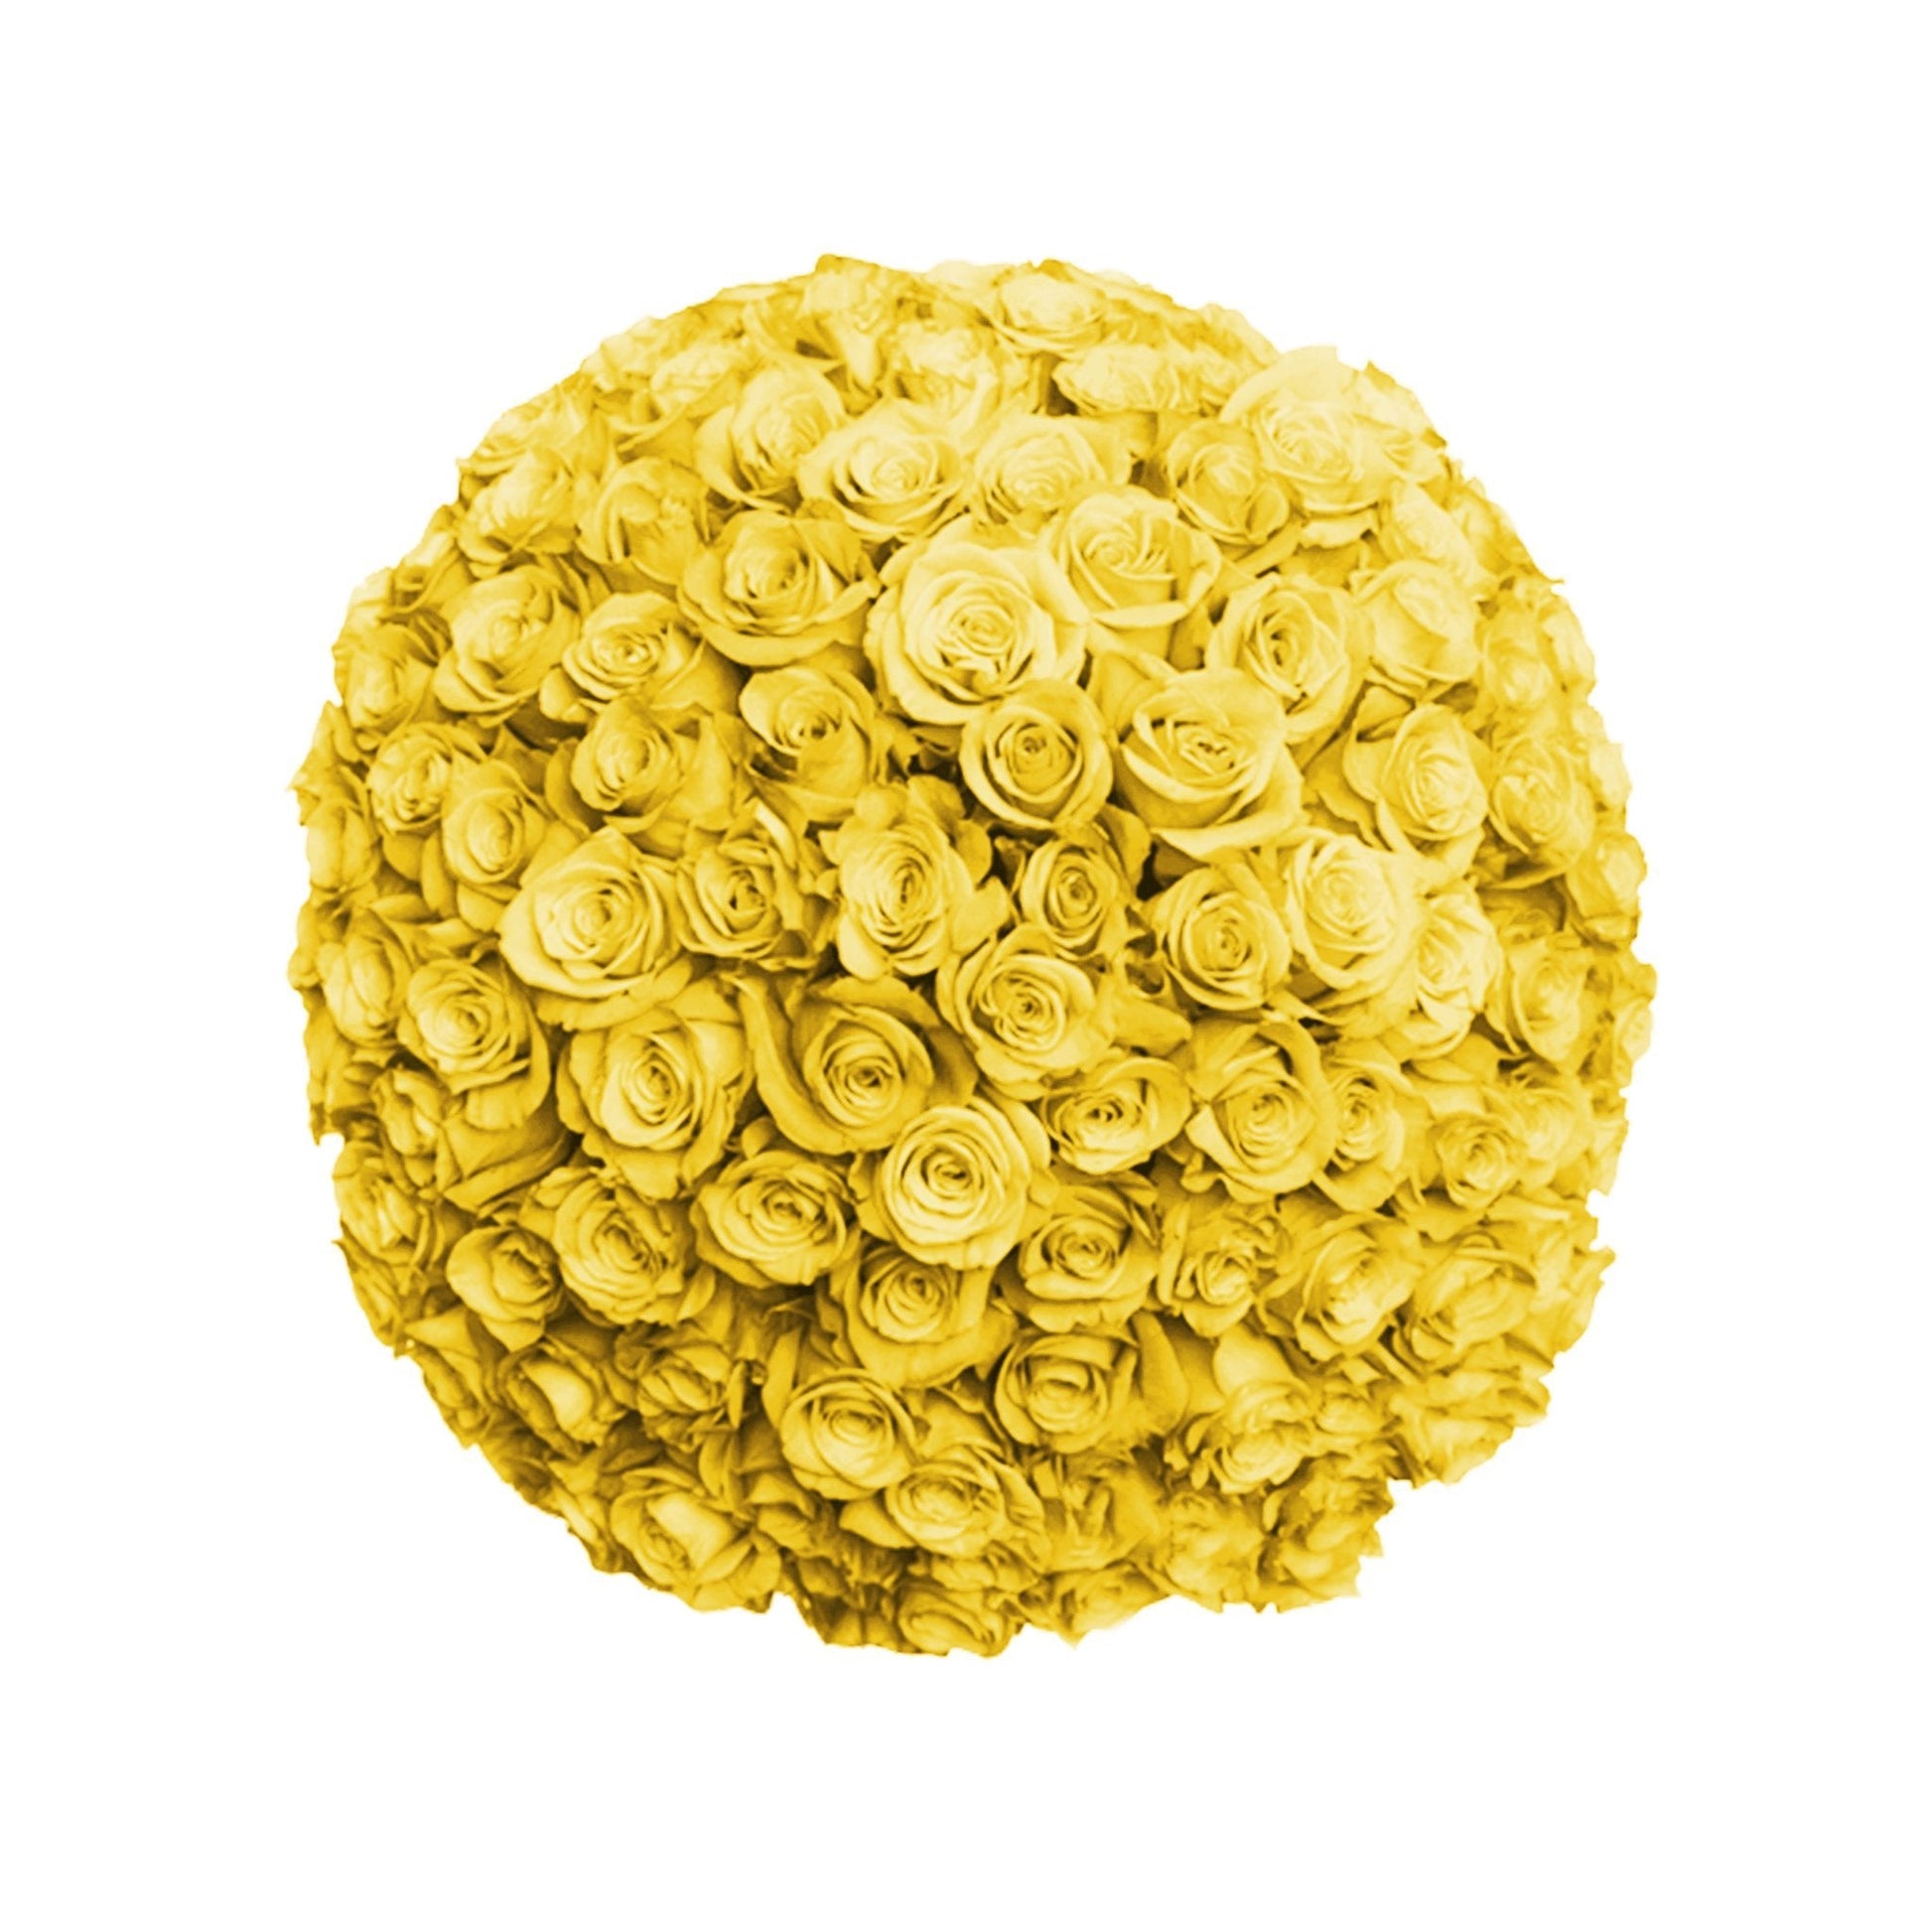 Fresh Roses in a Vase | 100 Yellow Roses - Floral Arrangement - Flower Delivery Brooklyn